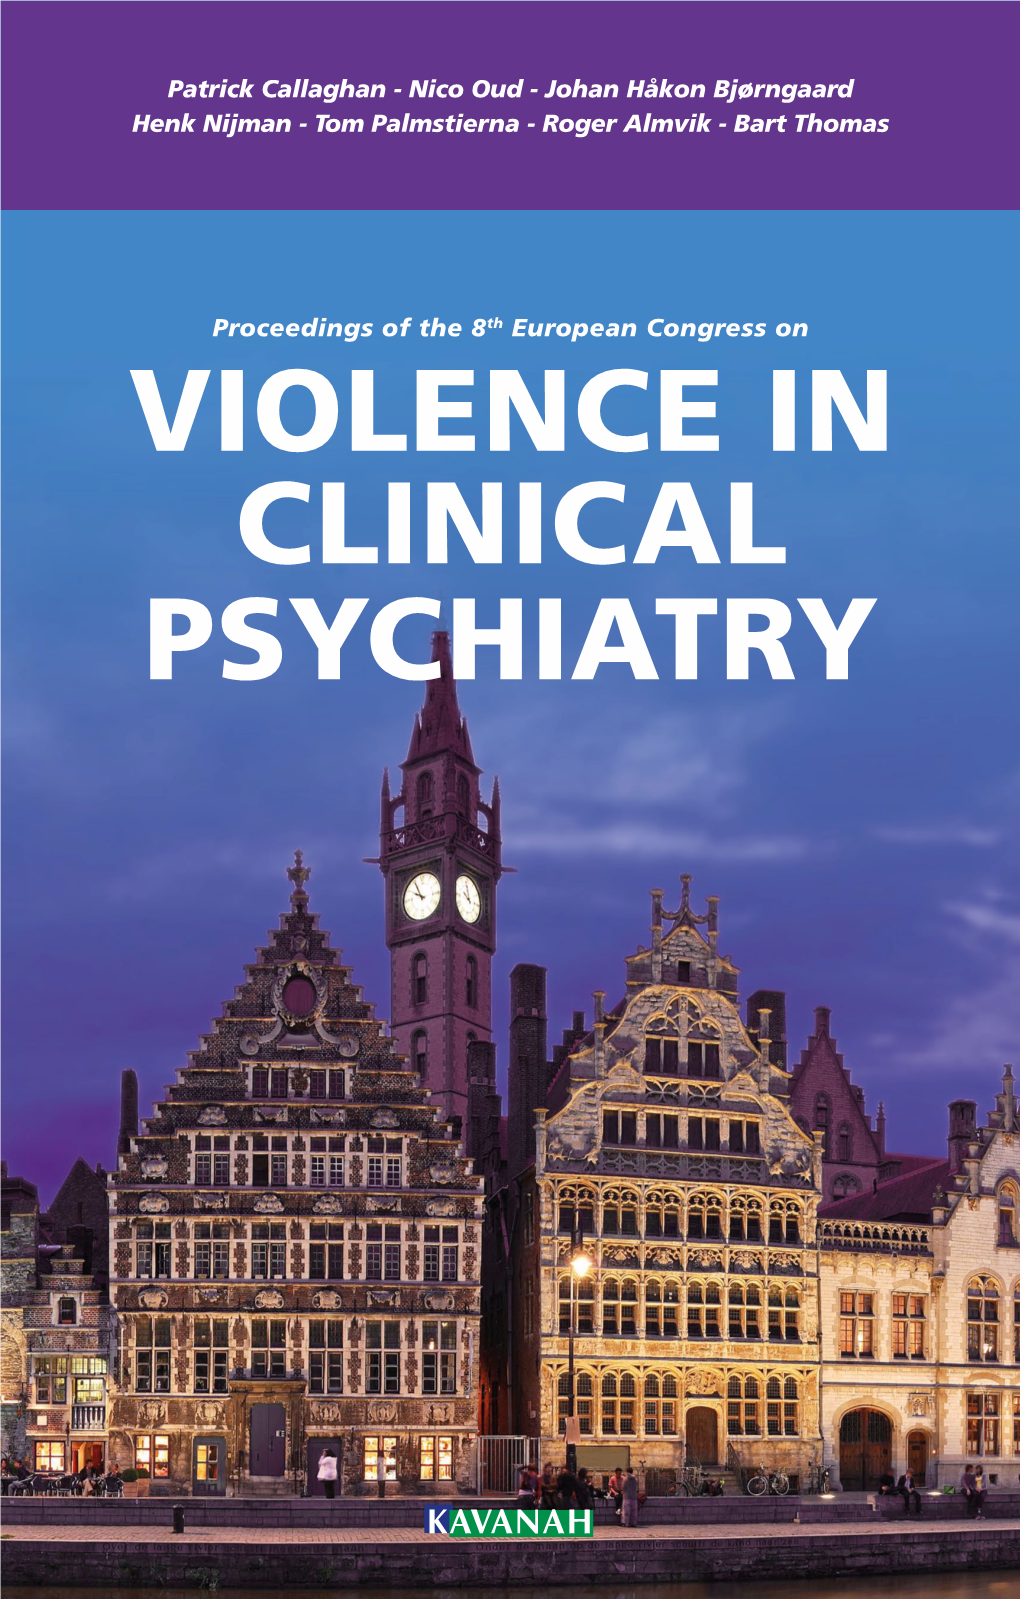 Violence in Clinical Psychiatry Is Taking Place in the Stimulating, Idiosyncratic and Authentic City of Ghent